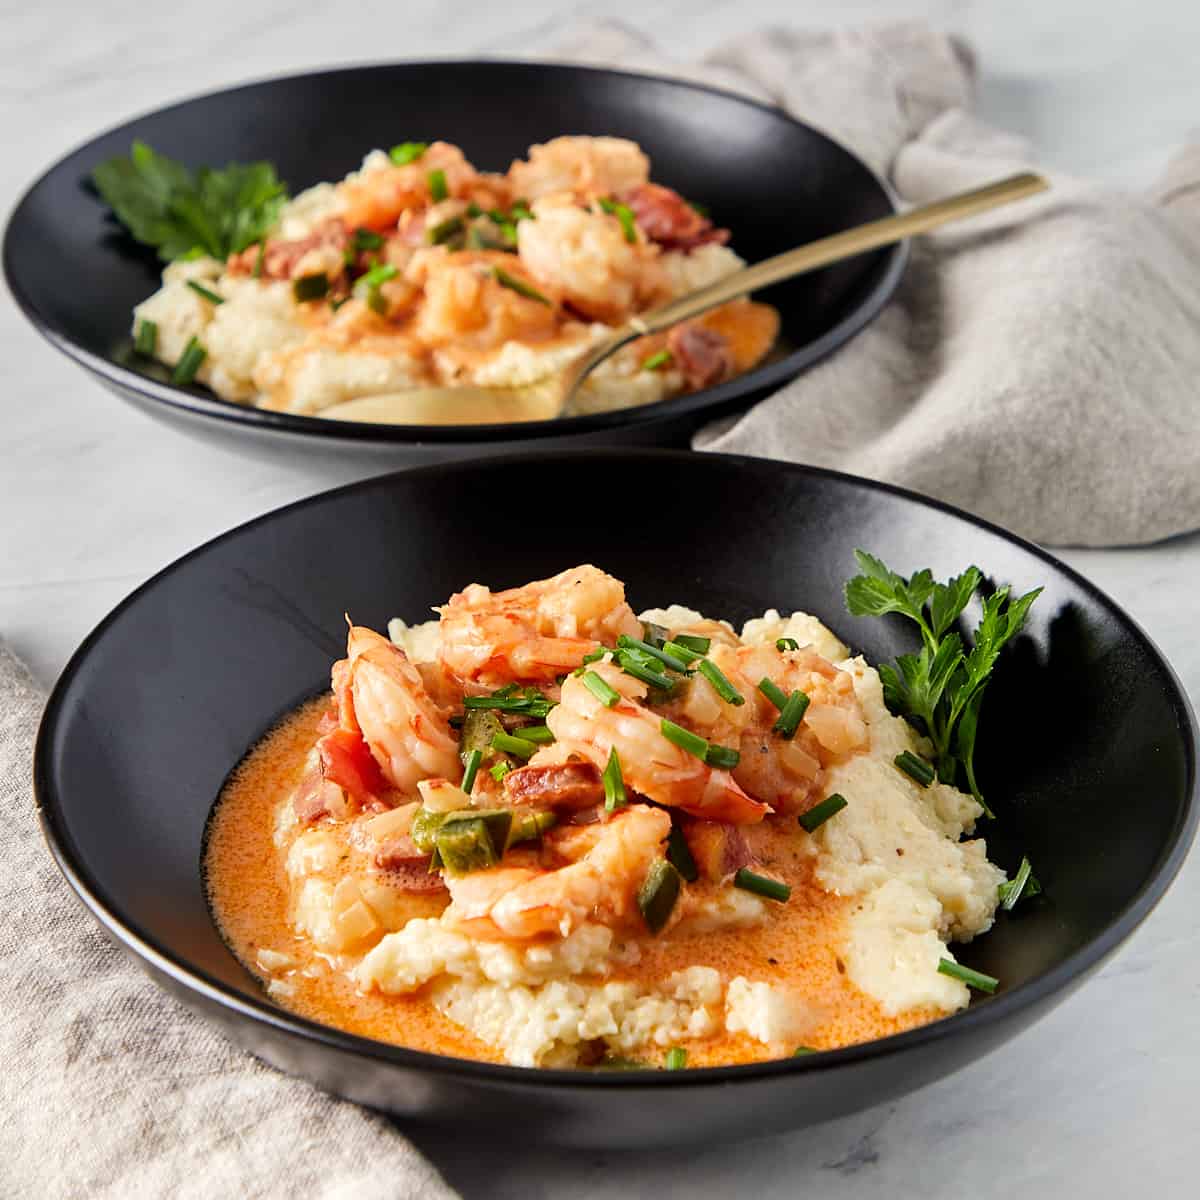 shrimp and grits in a black bowl